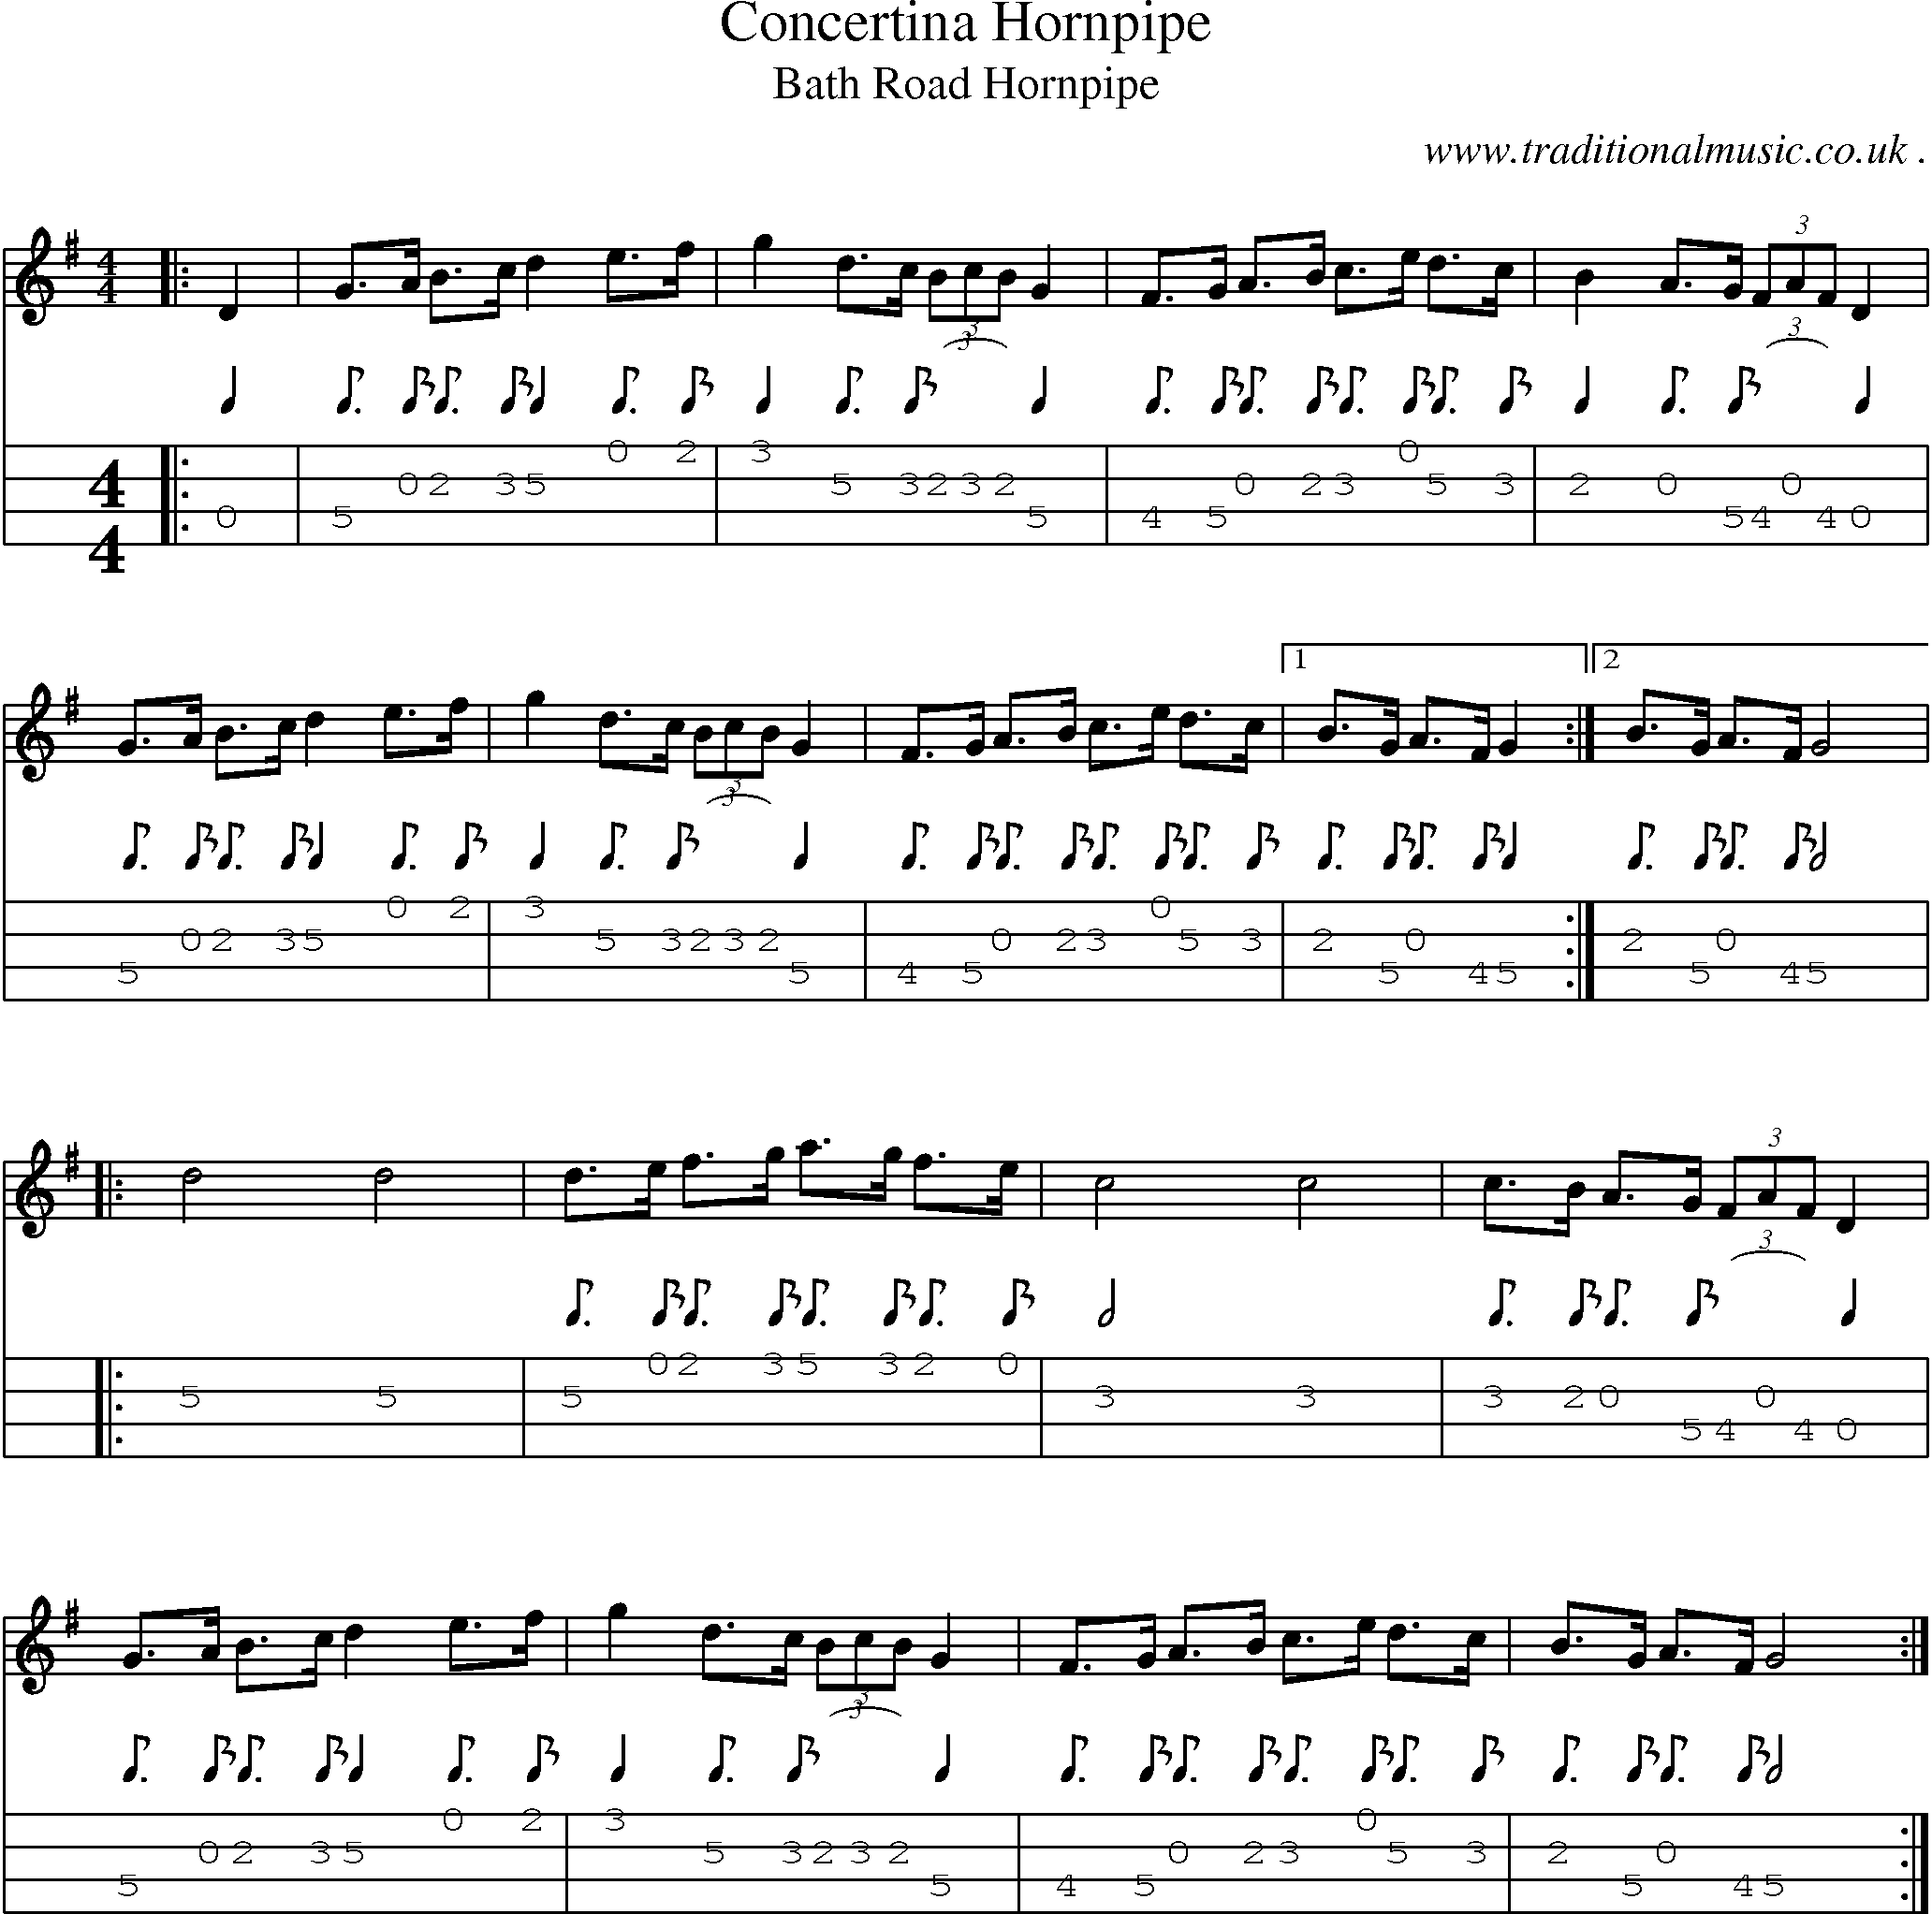 Sheet-Music and Mandolin Tabs for Concertina Hornpipe